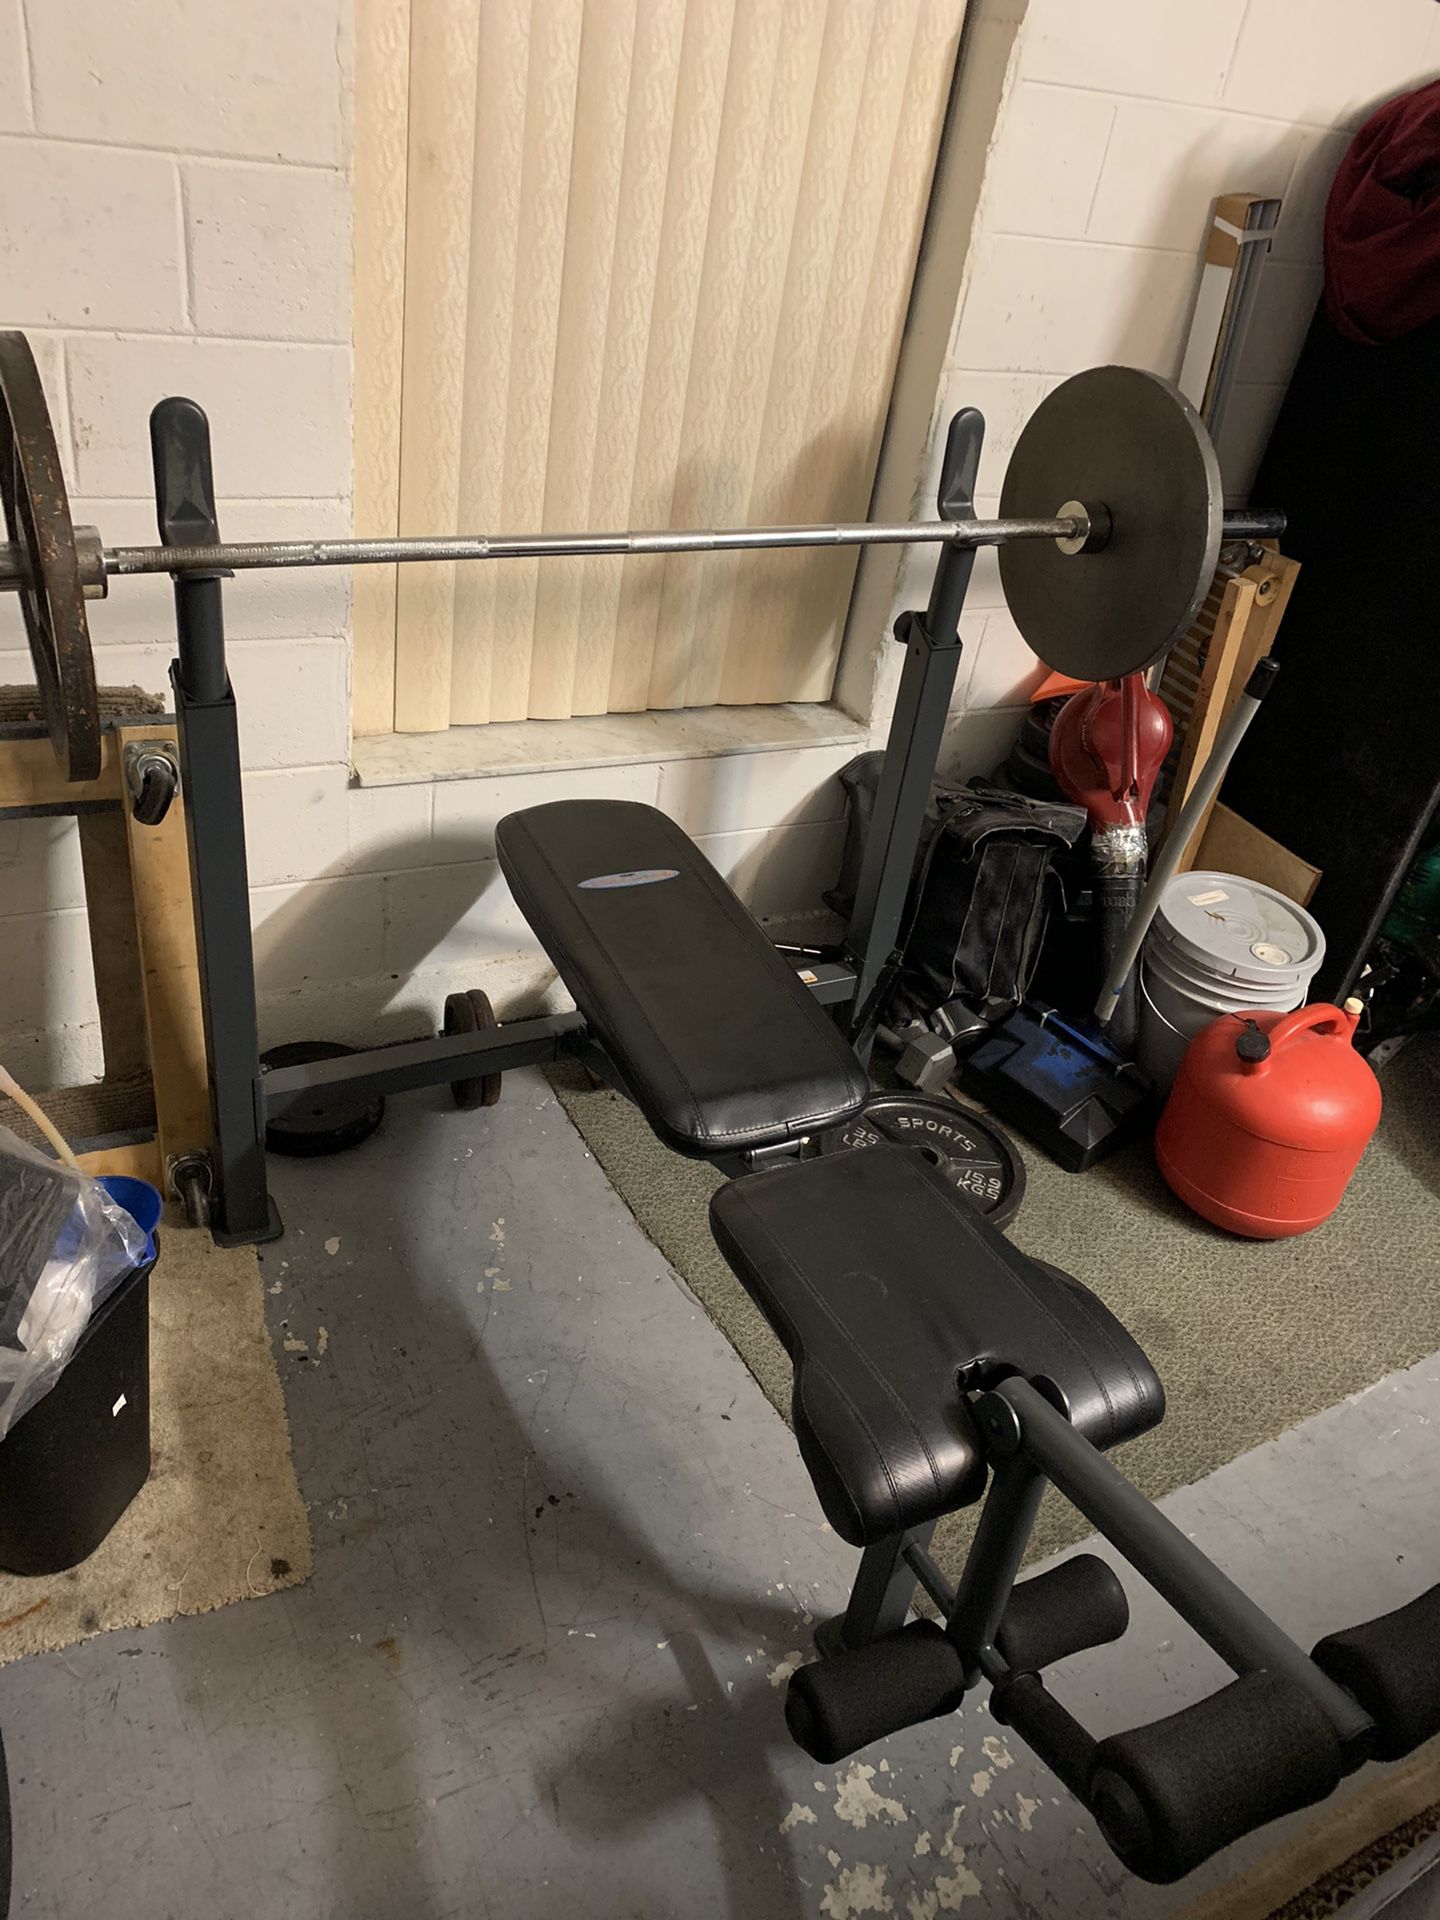 Bench press with weights